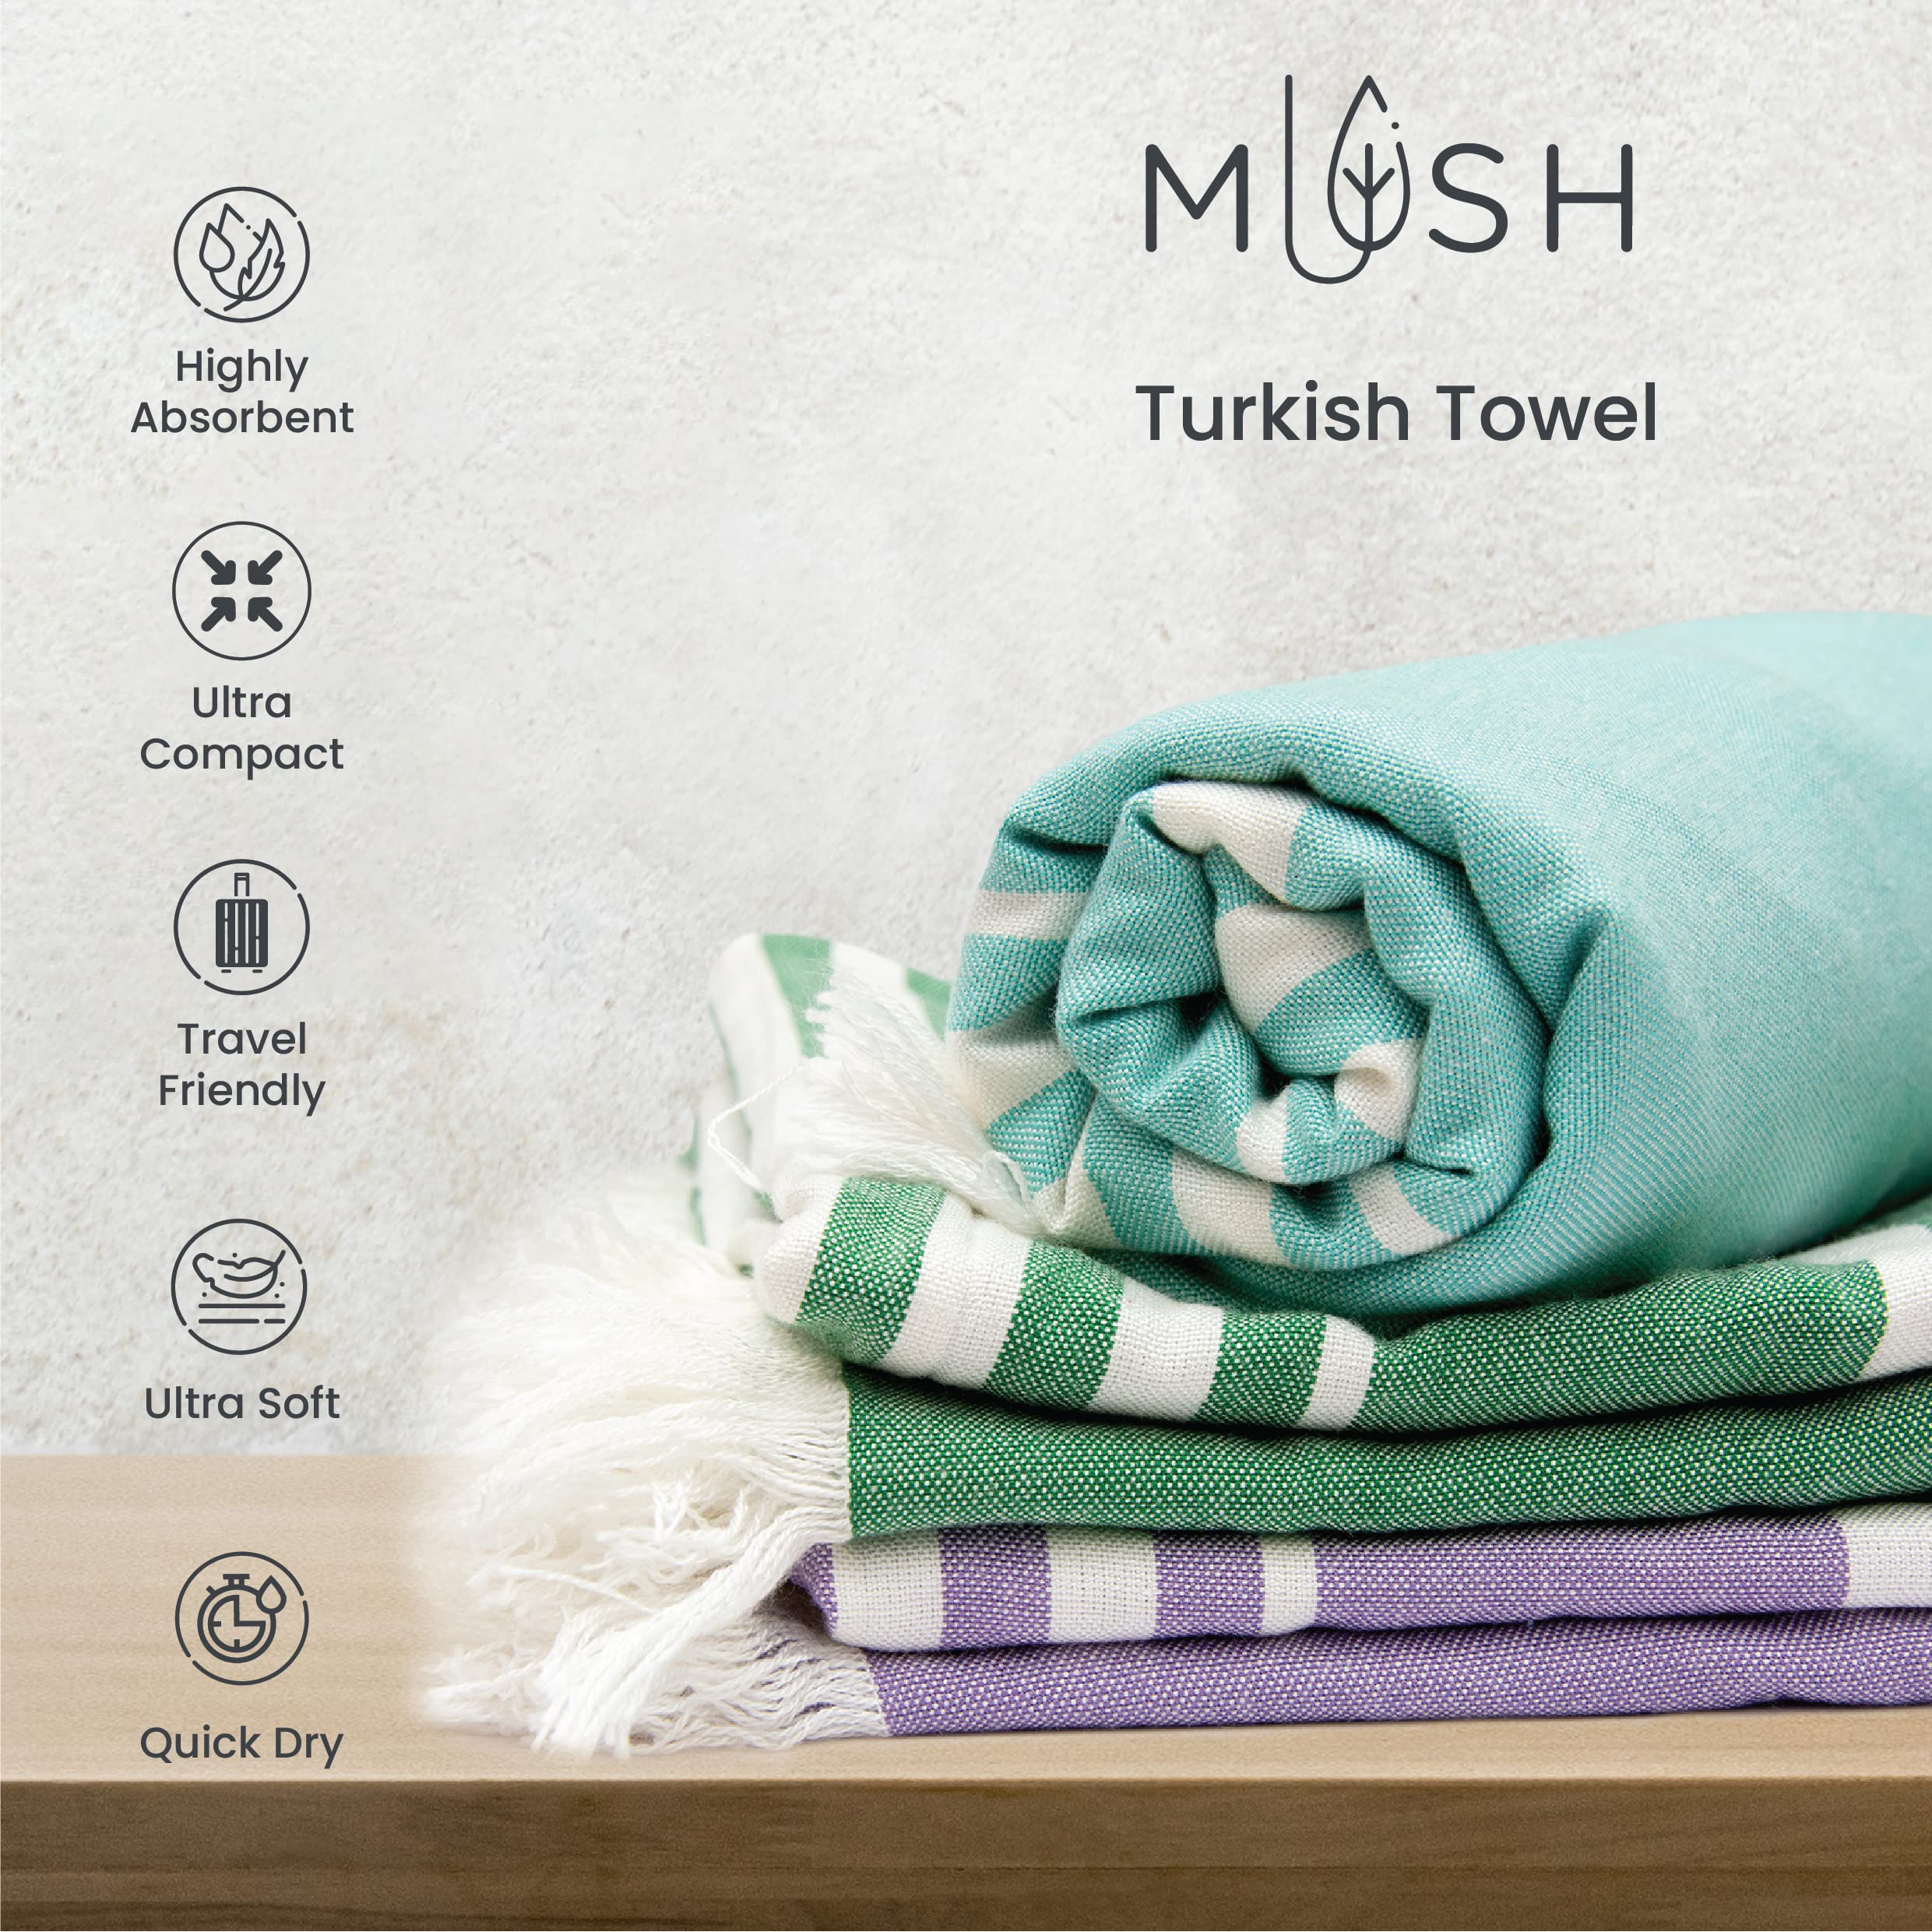 Mush 100% Bamboo Large Bath Towel | Ultra Soft, Absorbent, Light Weight, & Quick Dry Towel for Bath, Travel, Gym, Beach, Pool, and Yoga | 29 x 59 Inches / 75 X 150 cms (Set of 1, Dark Green)